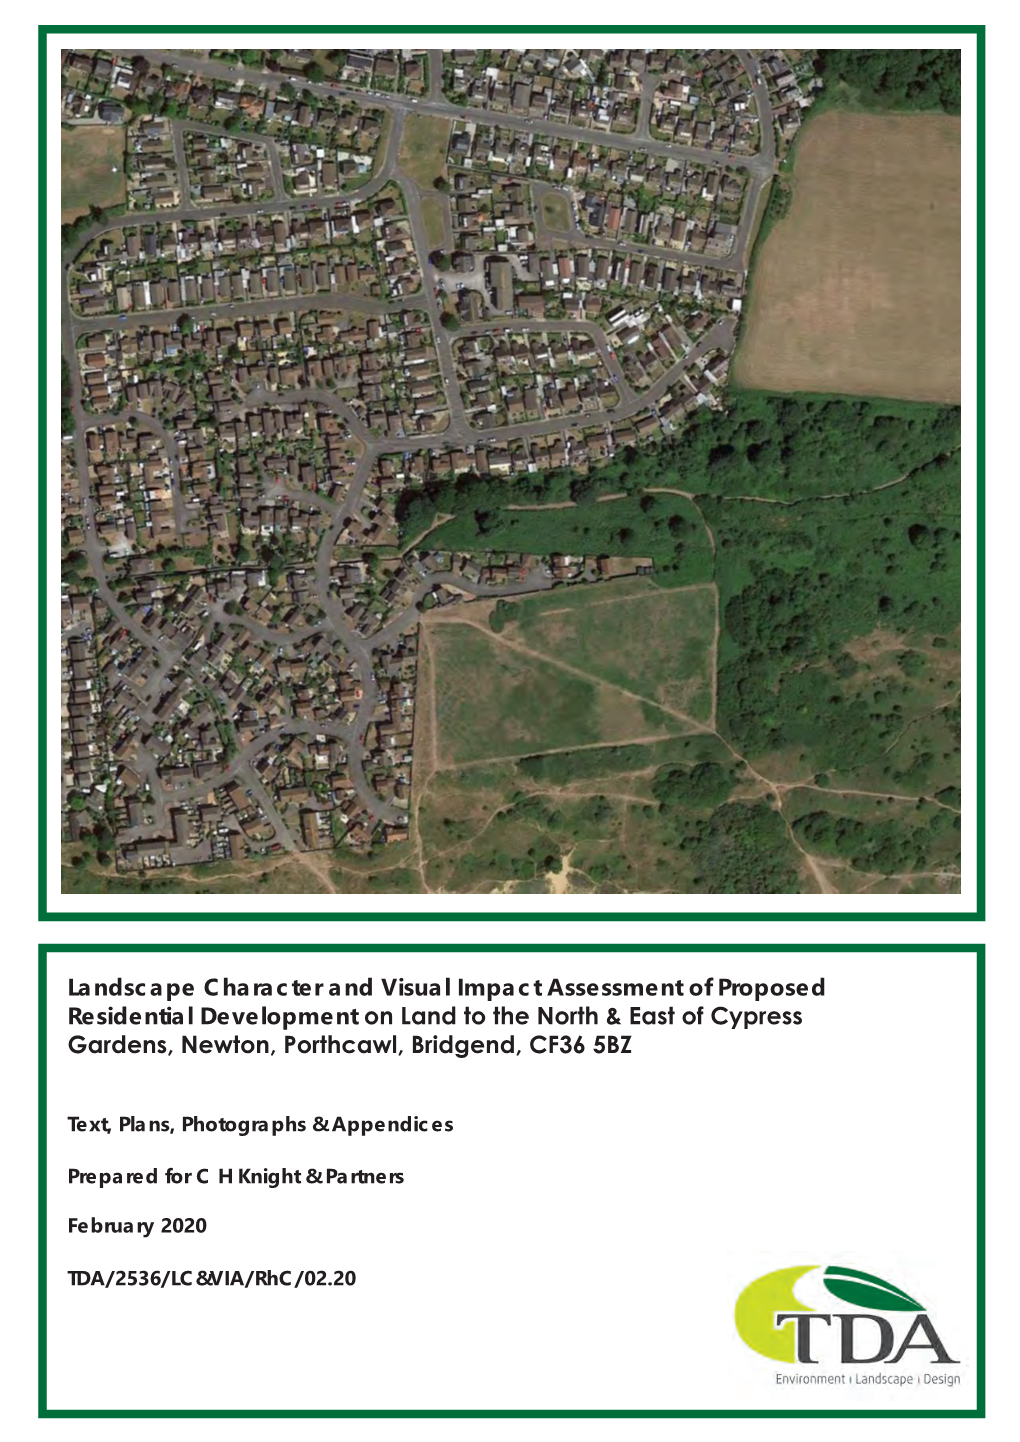 Landscape Character and Visual Impact Assessment of Proposed